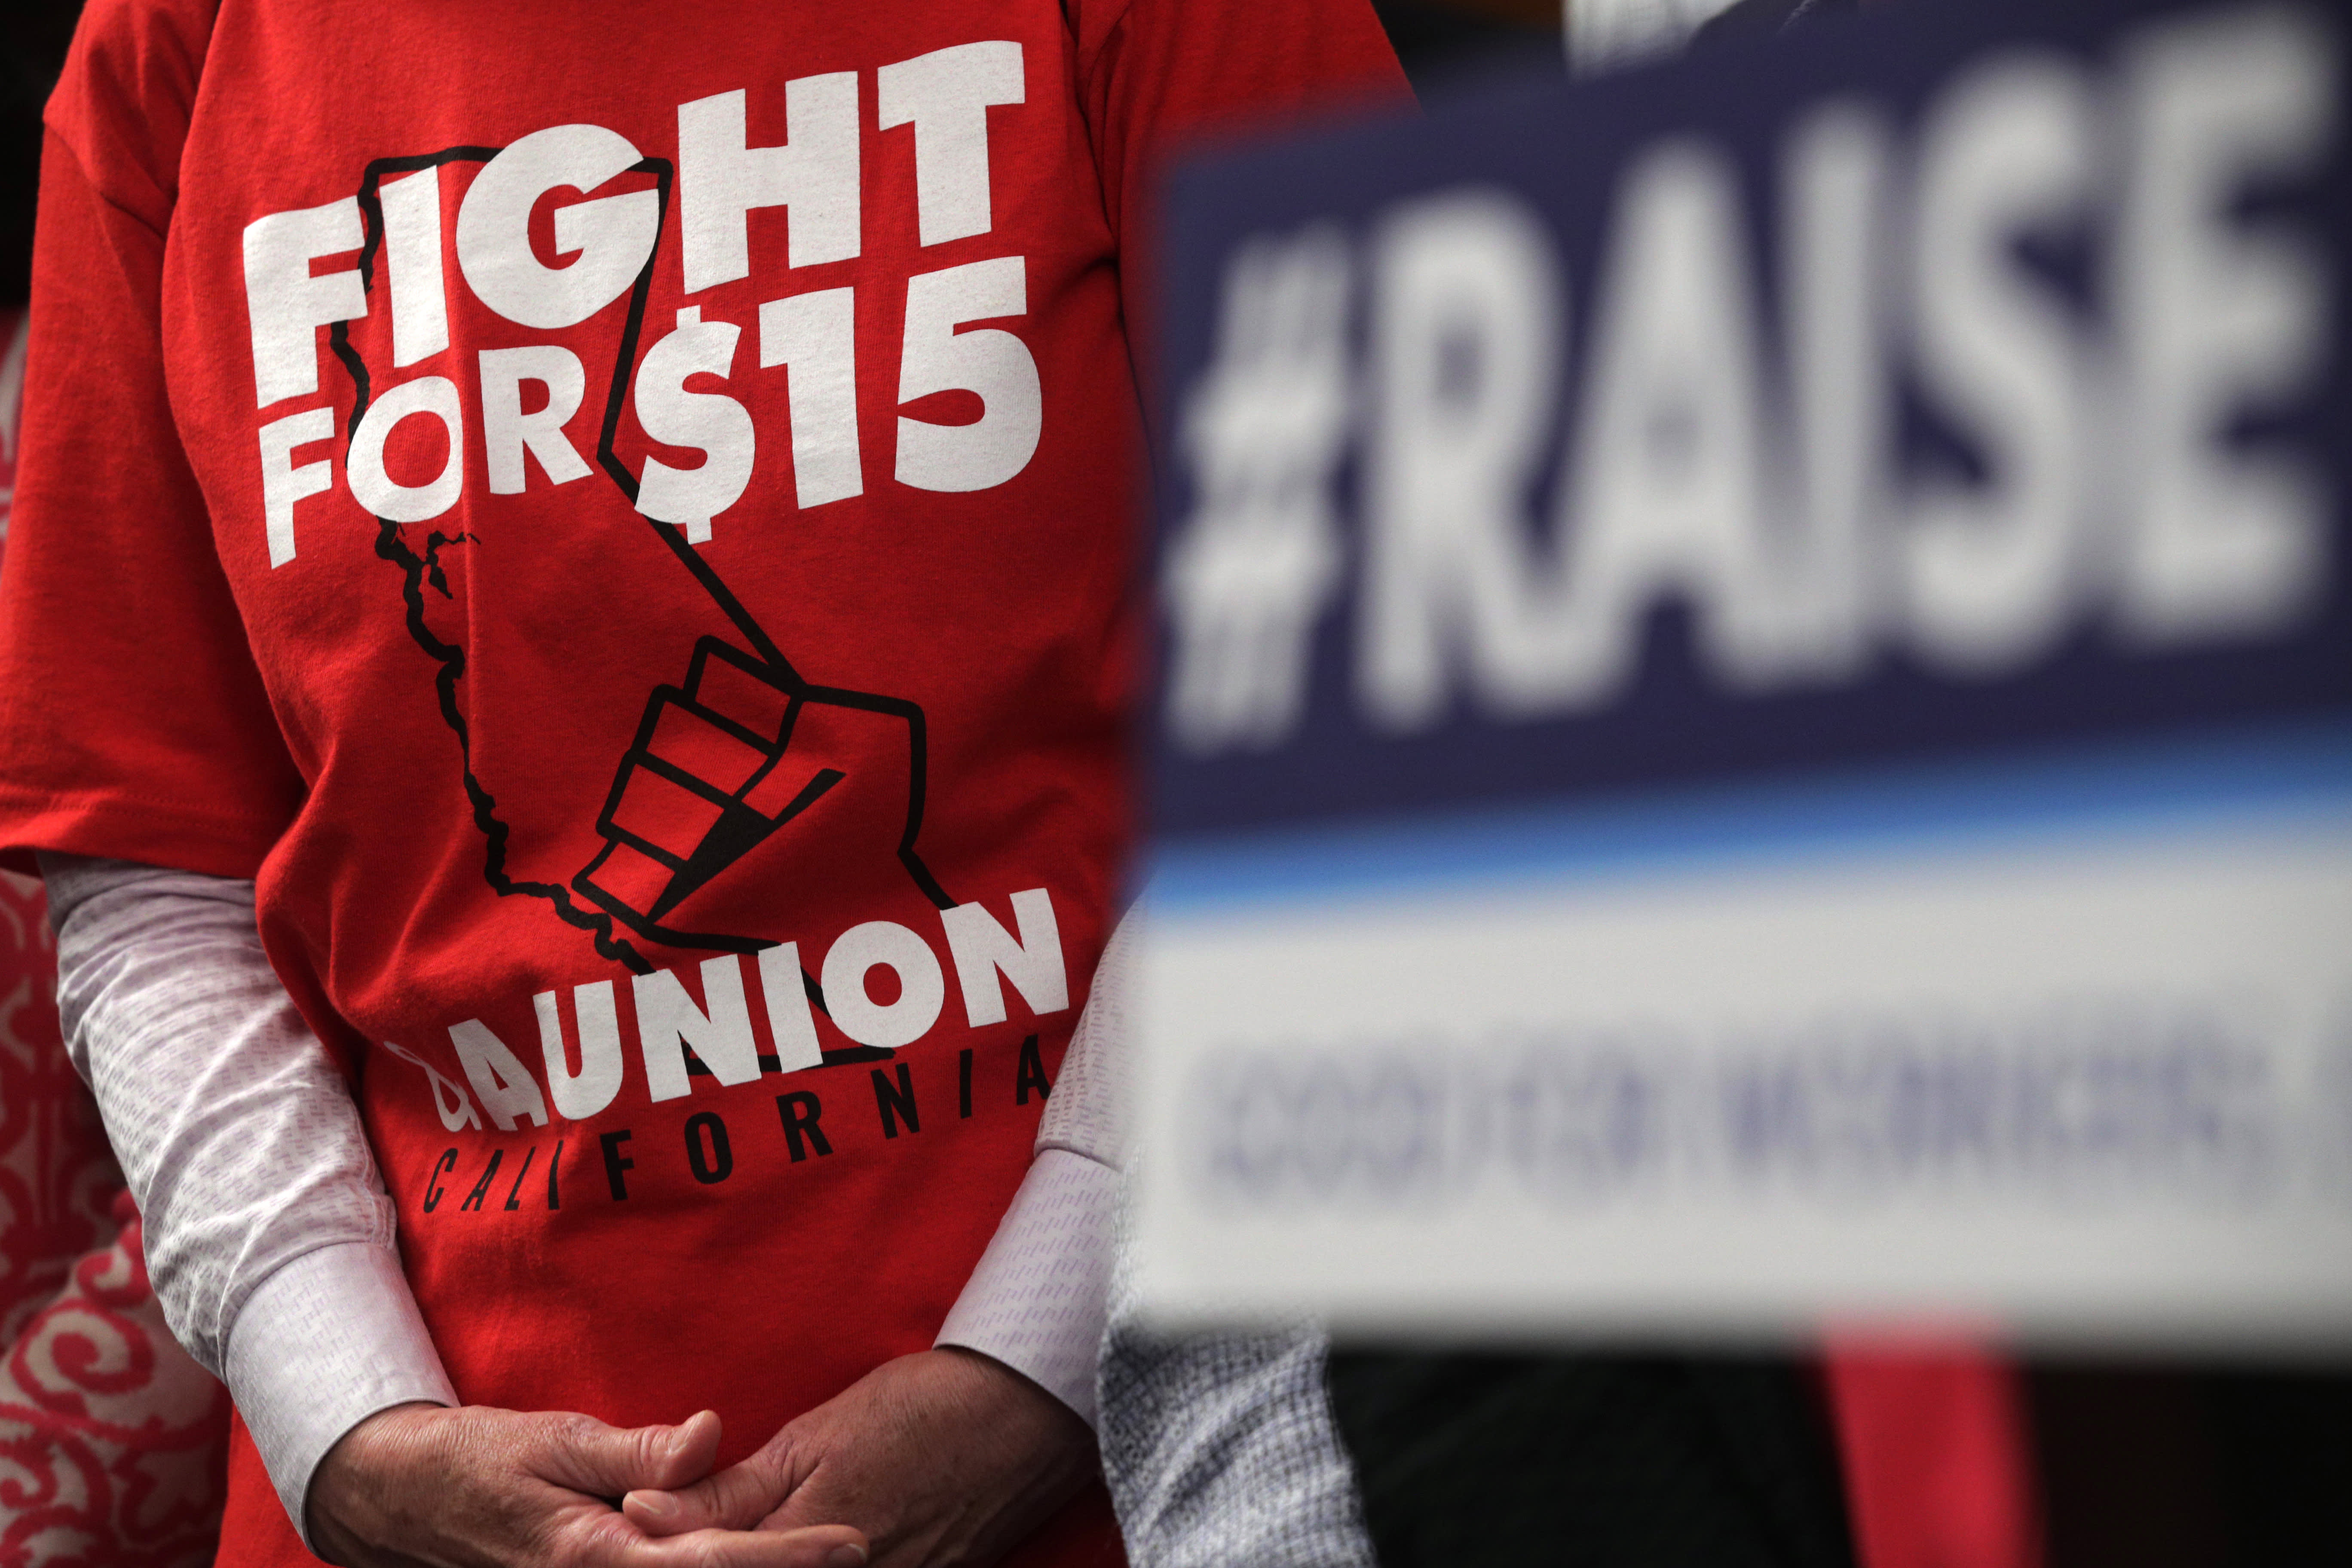 Raising the minimum wage to $ 15 would cost 1.4 million jobs, says CBO